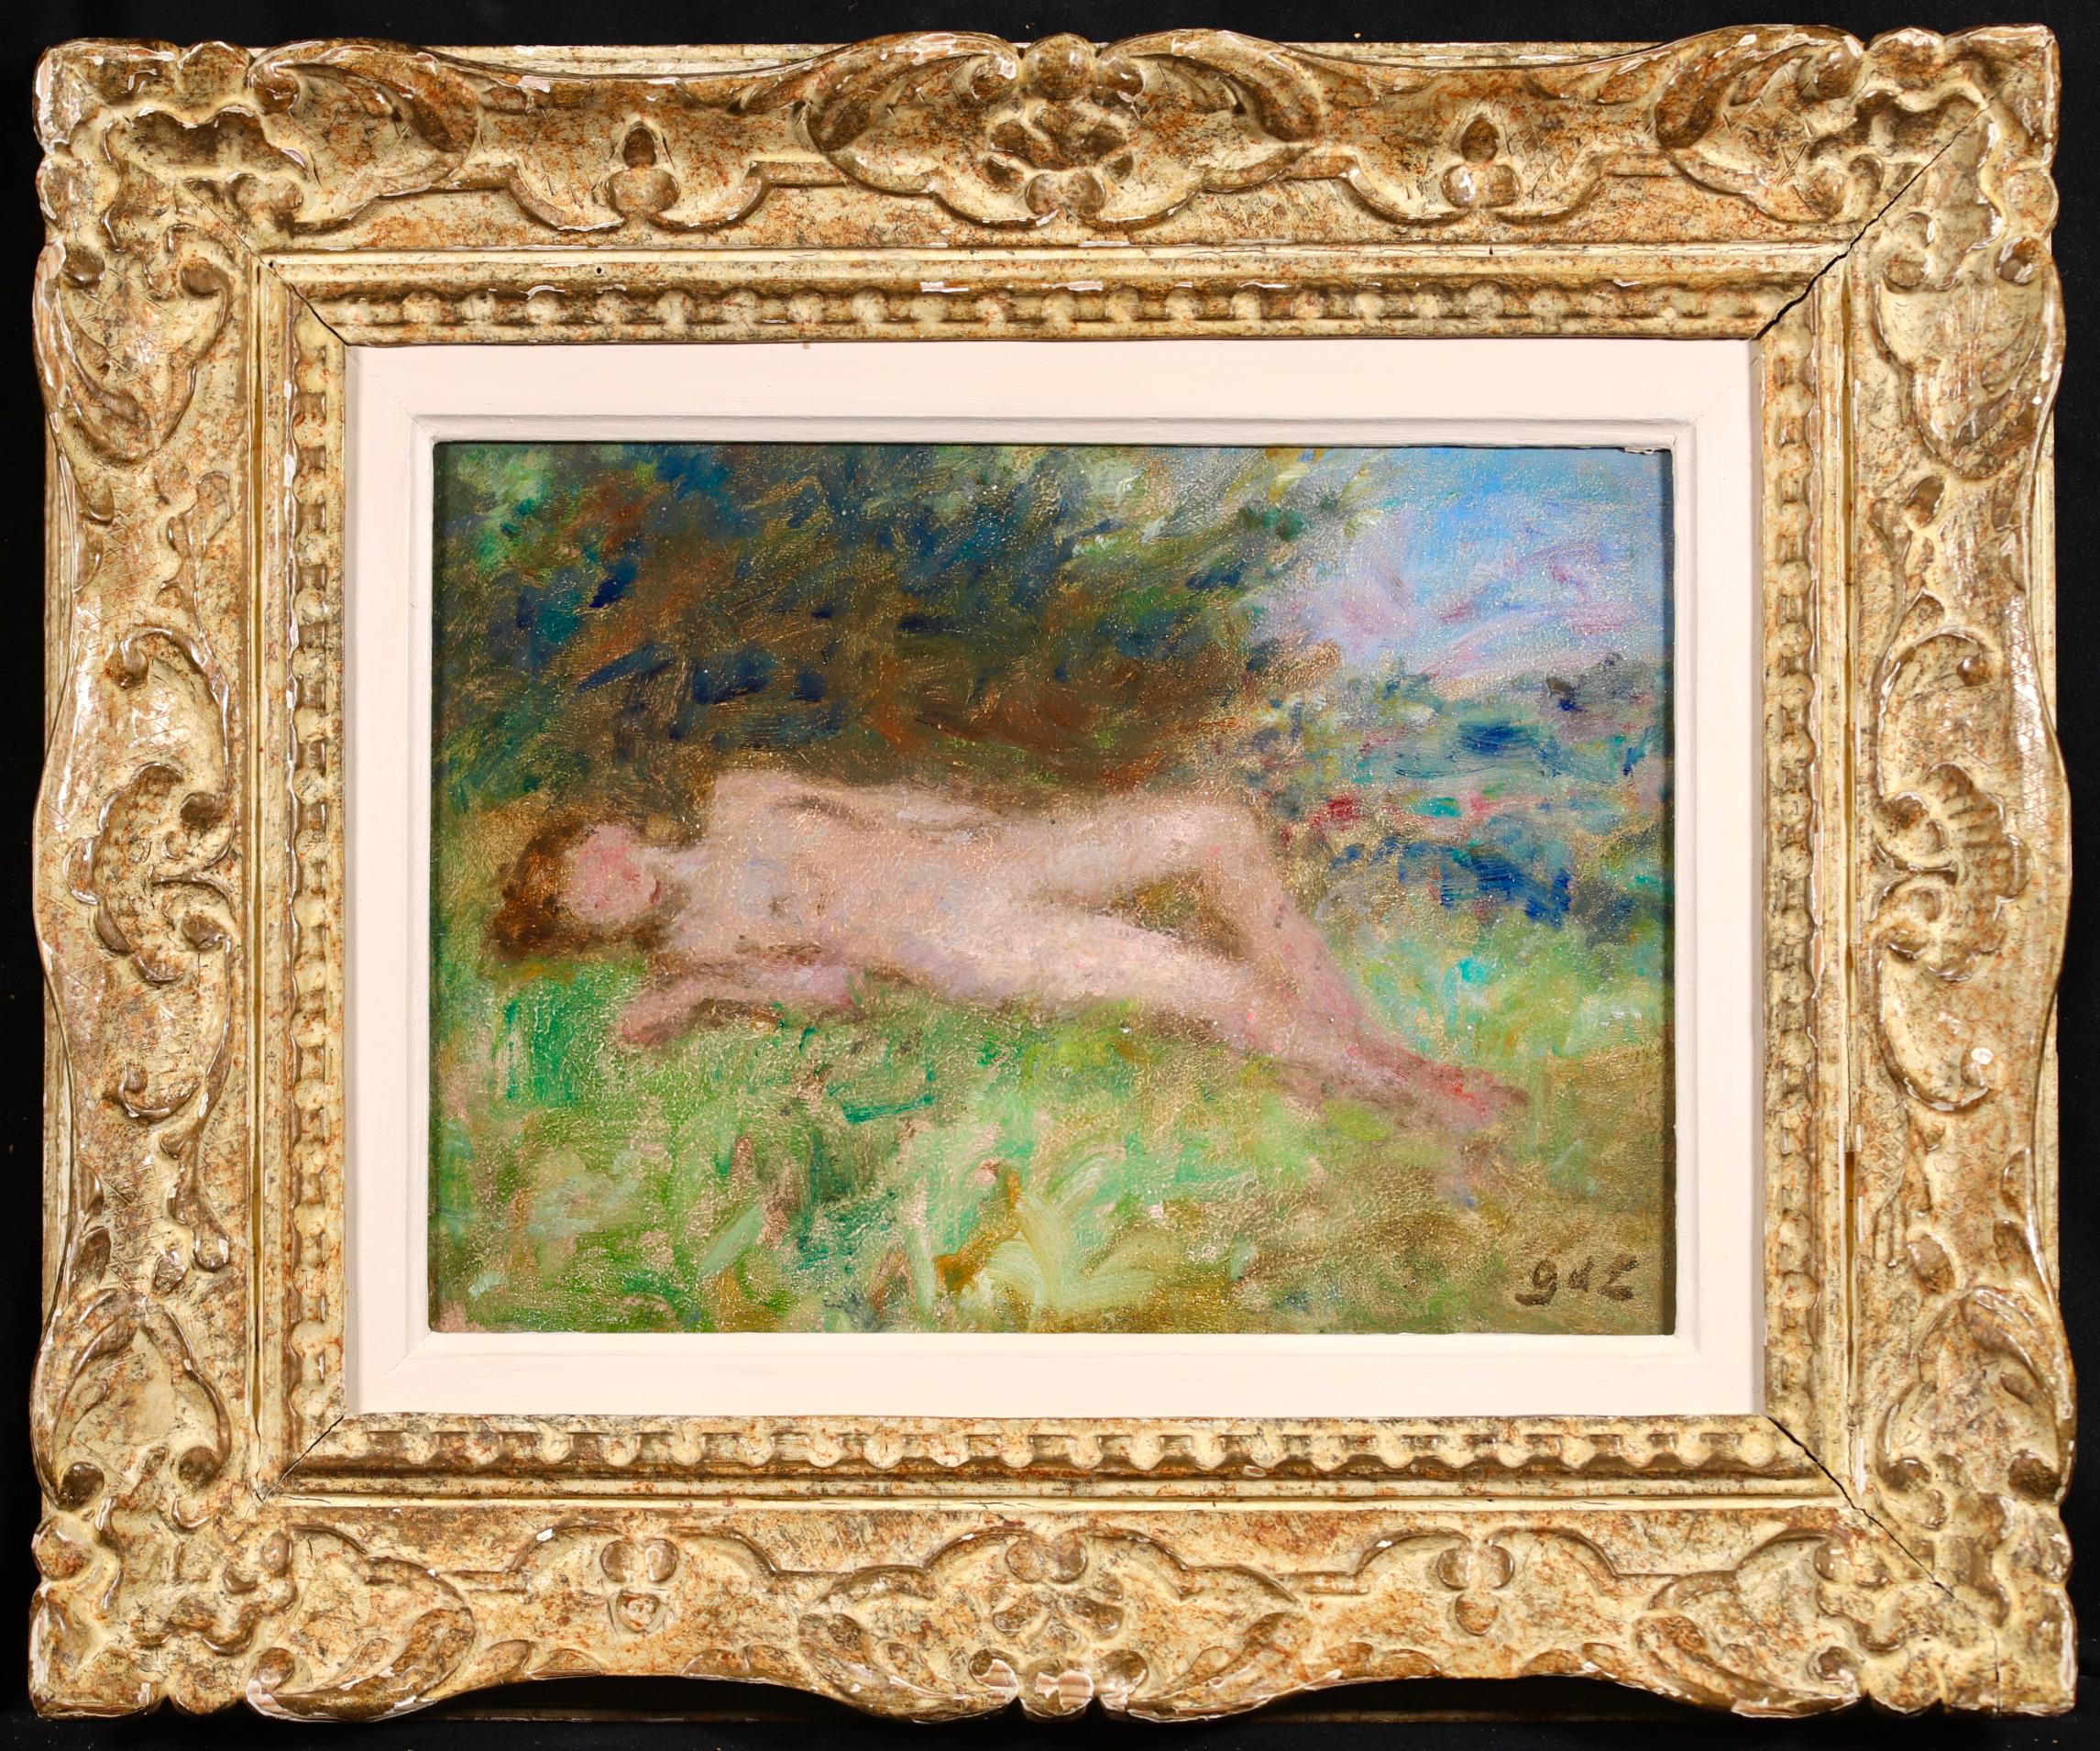 Signed oil on panel nude circa 1920 by French post impressionist painter Georges D'Espagnat. The work depicts a nude woman laying a patch of green grass on top of a hill with a view of the valley in the distance.

Signature:
Signed lower